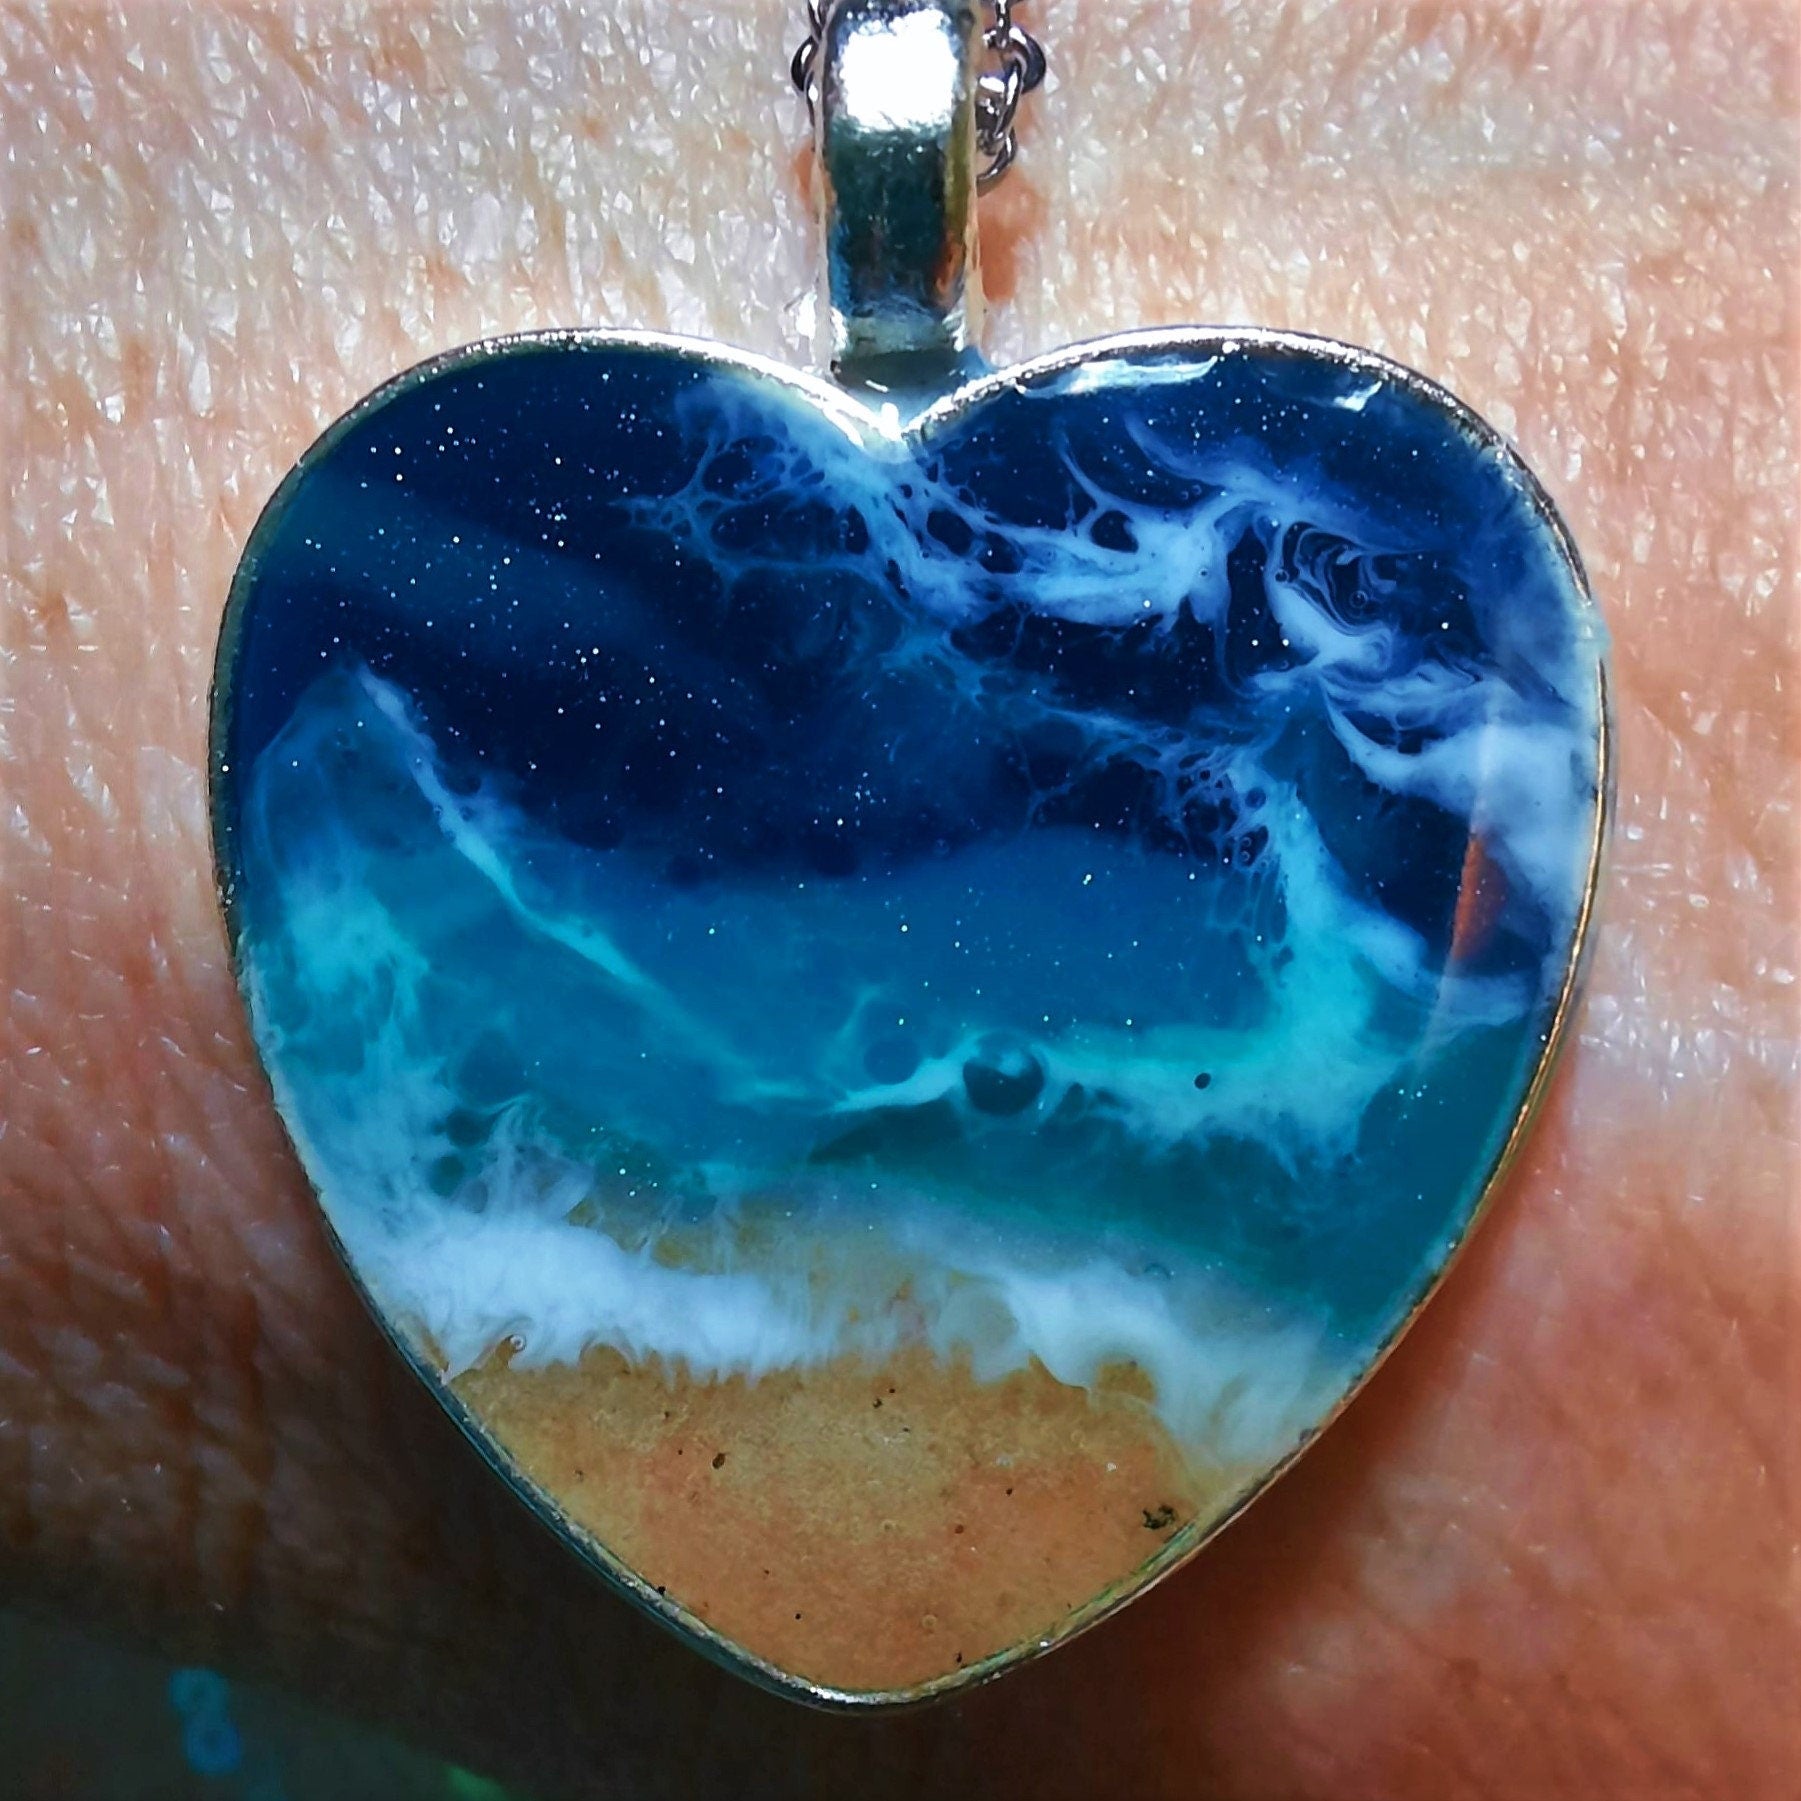 Heart Shaped Resin Waves / Ocean Pendant / Beach Scene Pendant Necklace Made with Resin and Real Sand - One of a Kind - Not a Photograph!